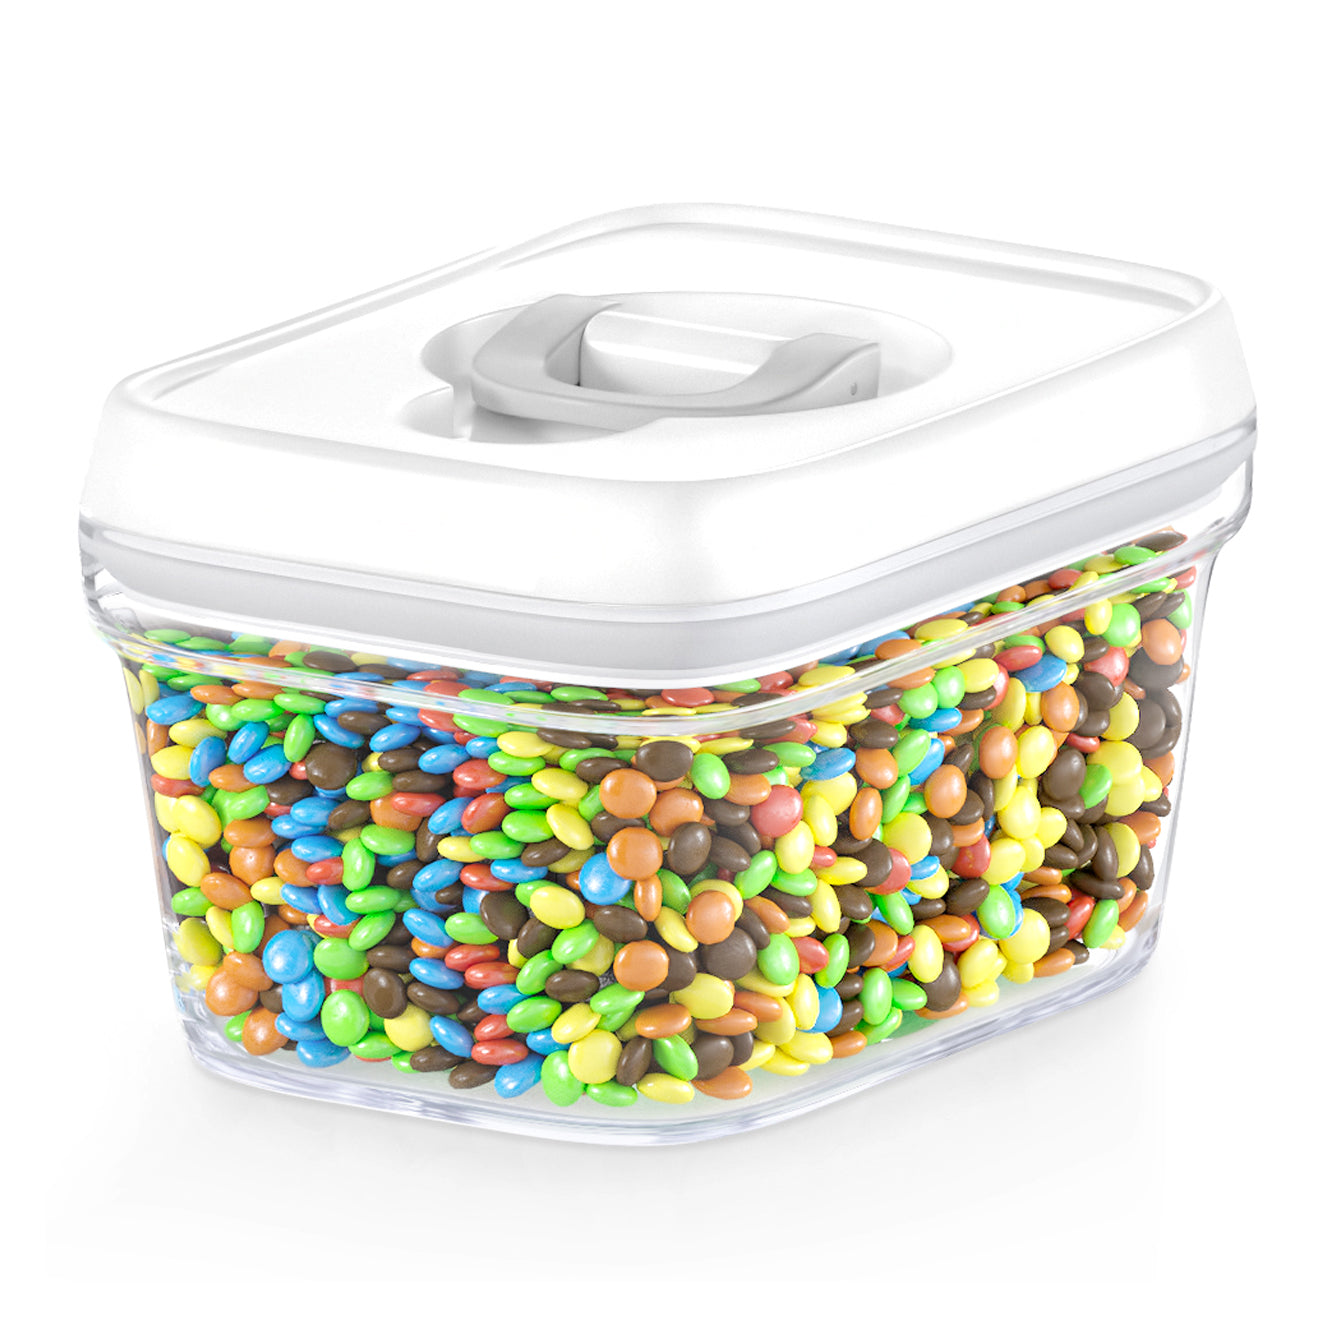 Airtight Food Storage Container - Best Seal - Pantry Container